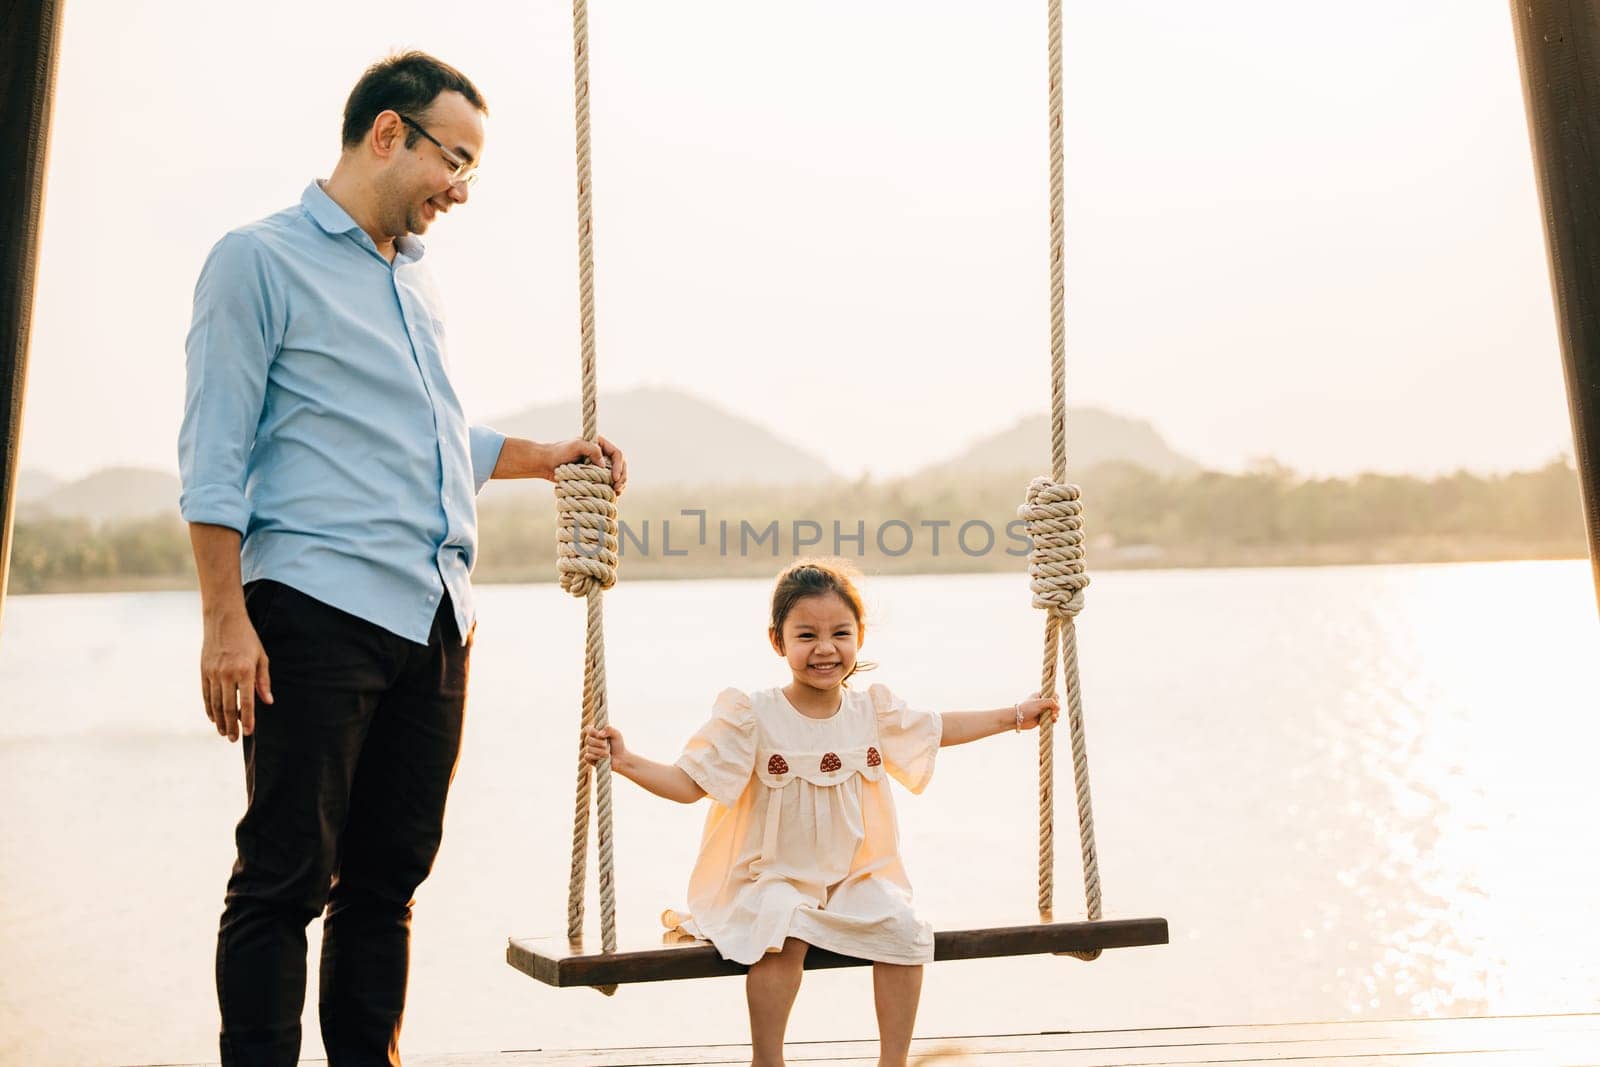 A happy Asian family spending quality time together on a sunny summer day at the playground, with the father pushing his cute daughter on a swing and both of them smiling and laughing with joy